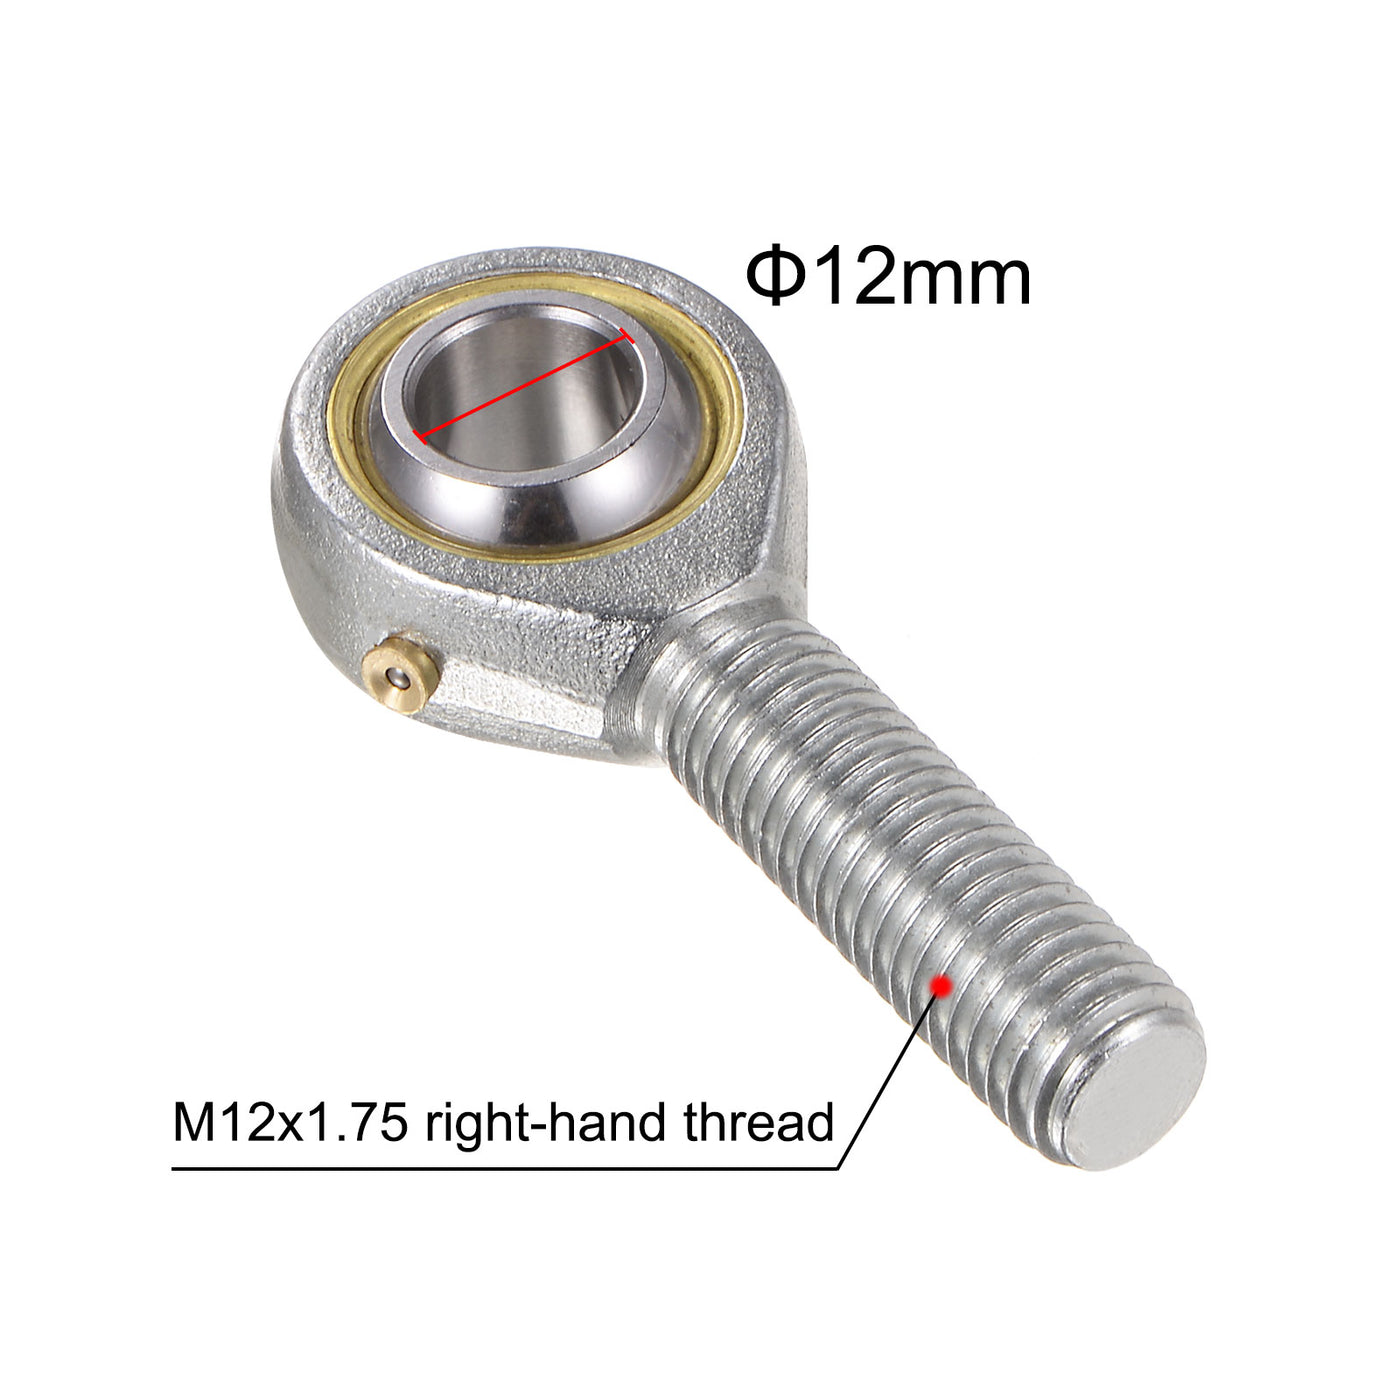 uxcell Uxcell 2pcs POS12 M12 Male Rod End Bearing M12x1.75 Right Hand Thread,Includes Jam Nut